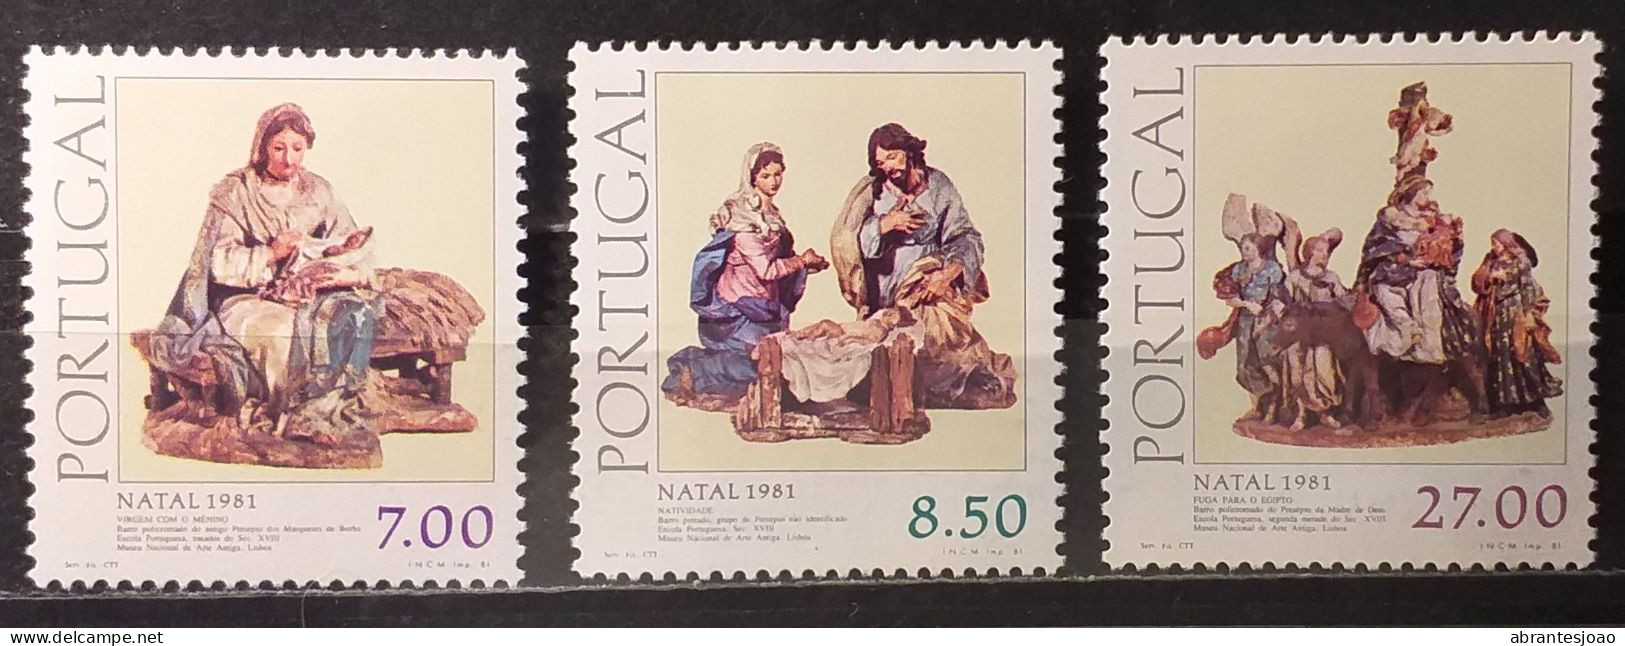 1981 - Portugal - MNH - 5th. Centenary Of Access Of King John II To The Throne + Christmas - 5 Stamps - Nuovi